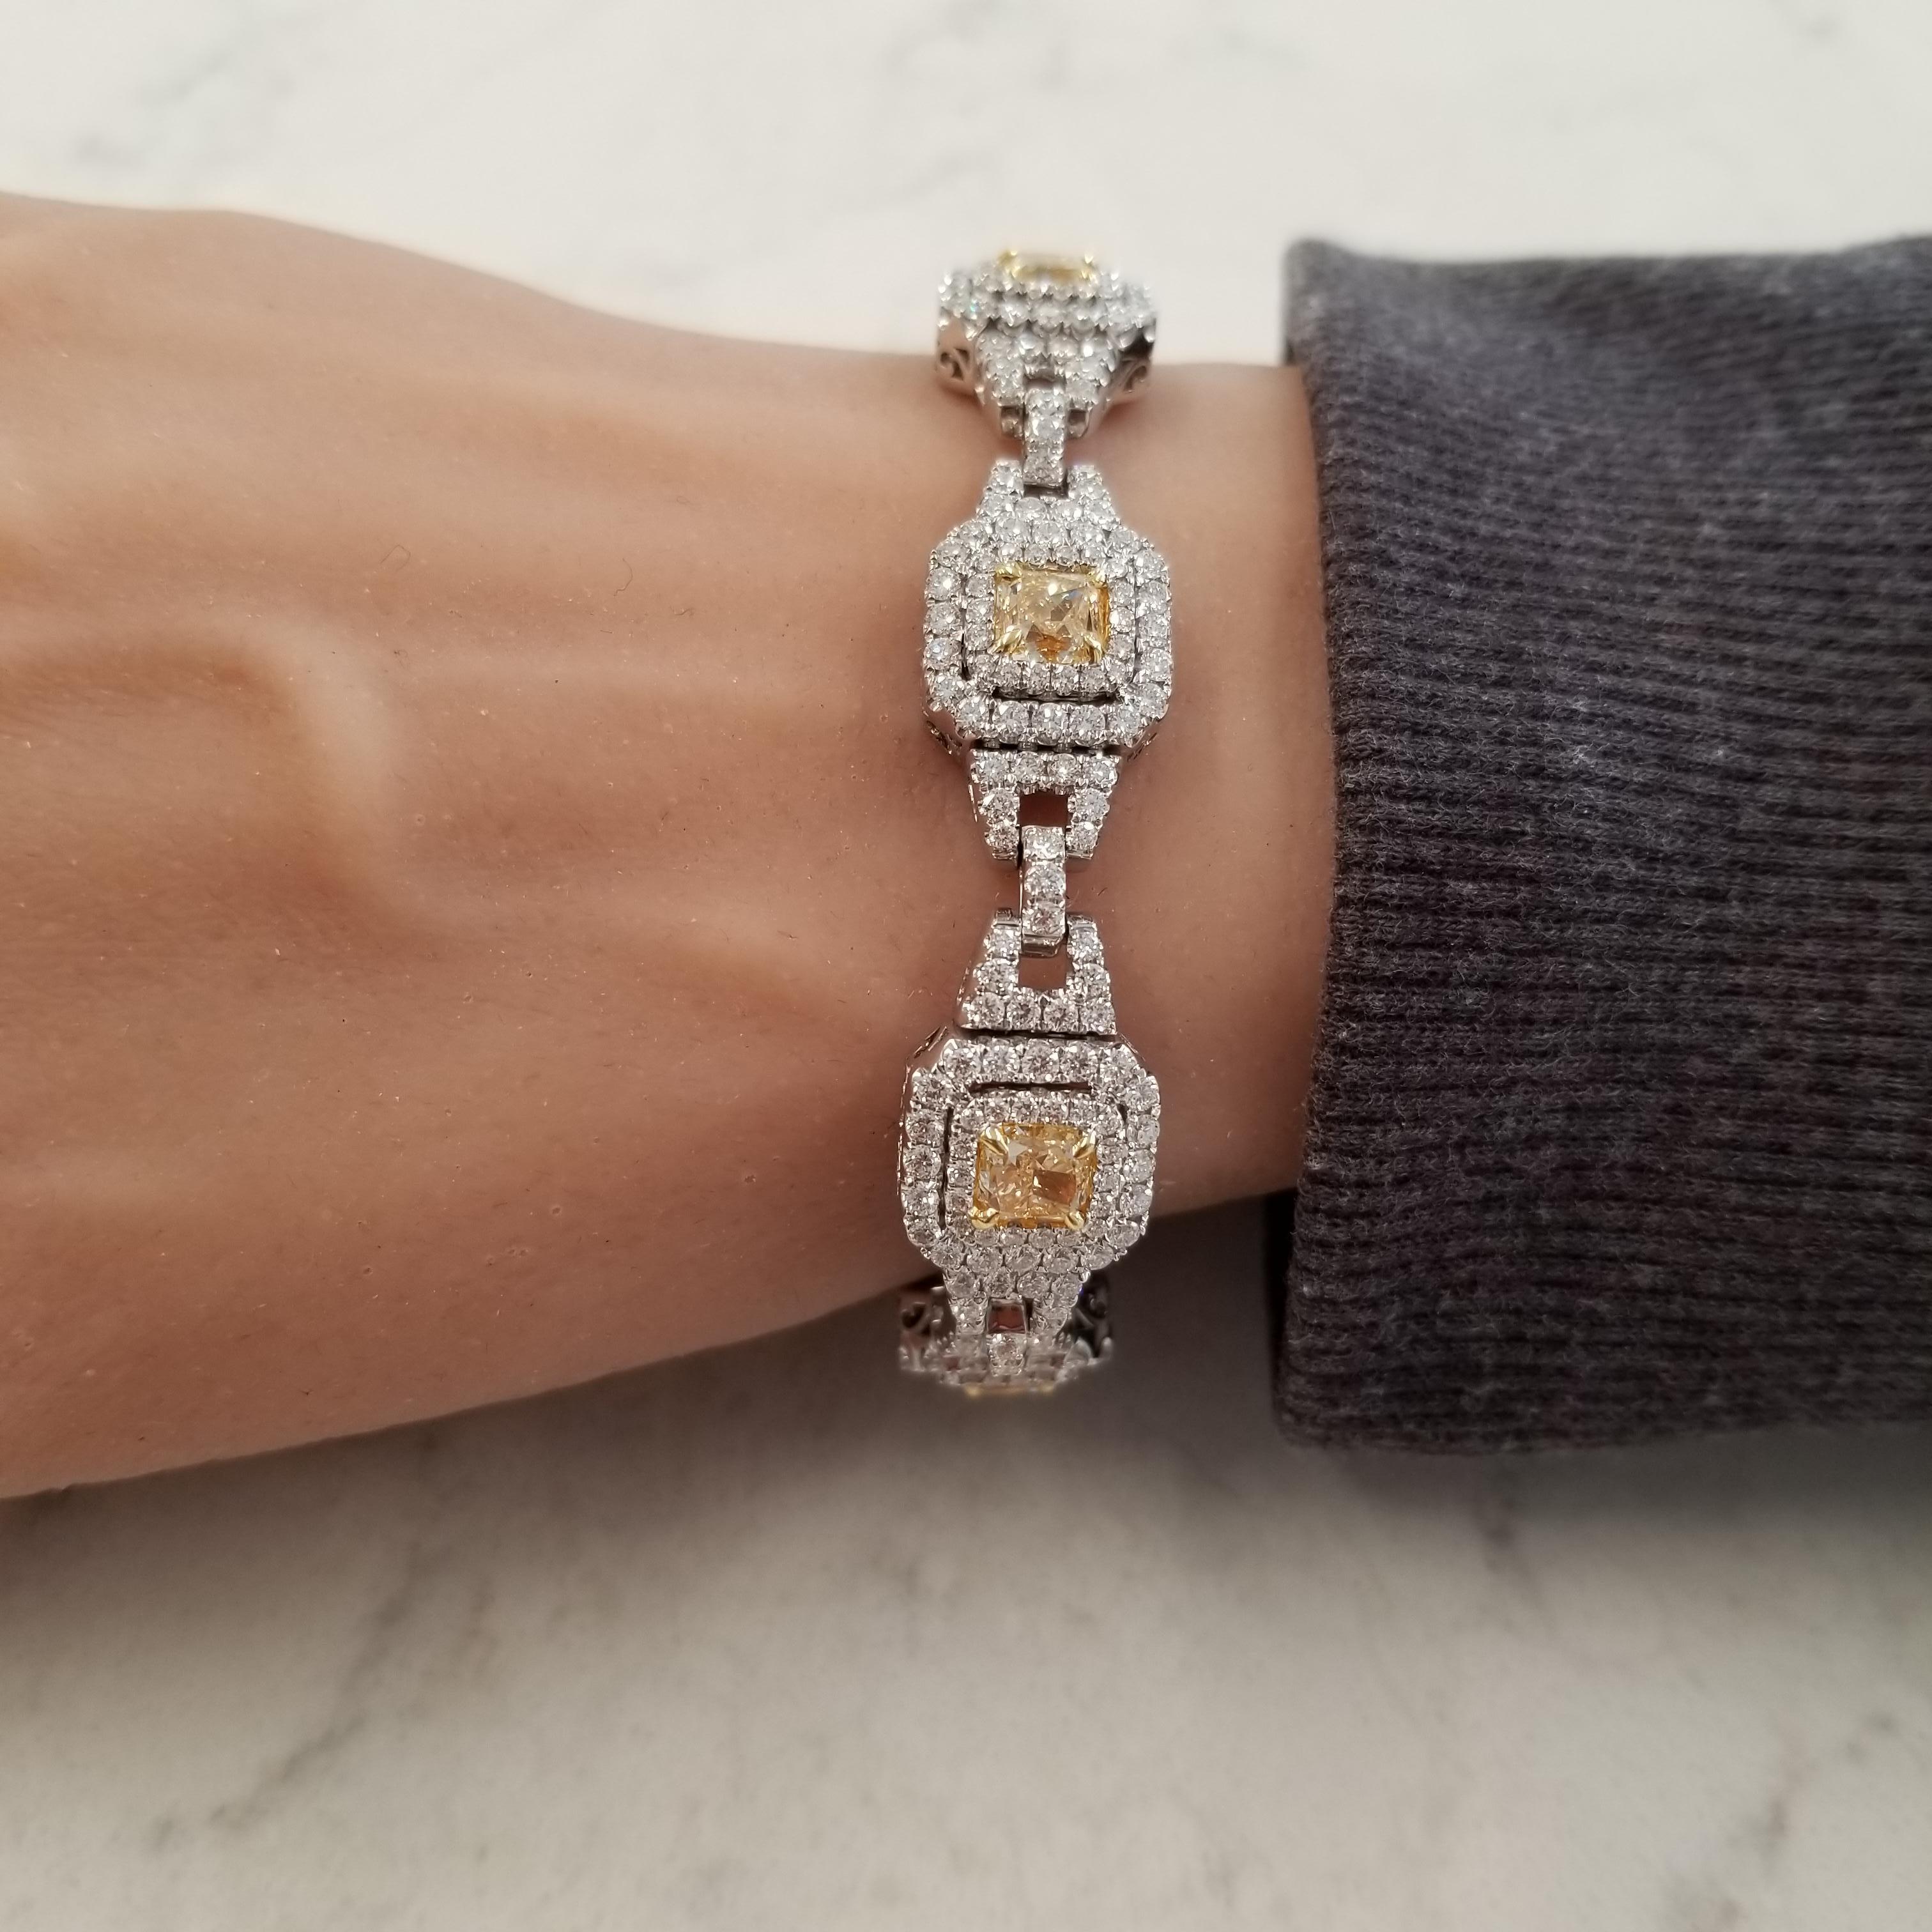 EGL USA Certified 7.73 Carat Total Cushion Cut Yellow Diamond Bracelet In 18K  In New Condition For Sale In Chicago, IL